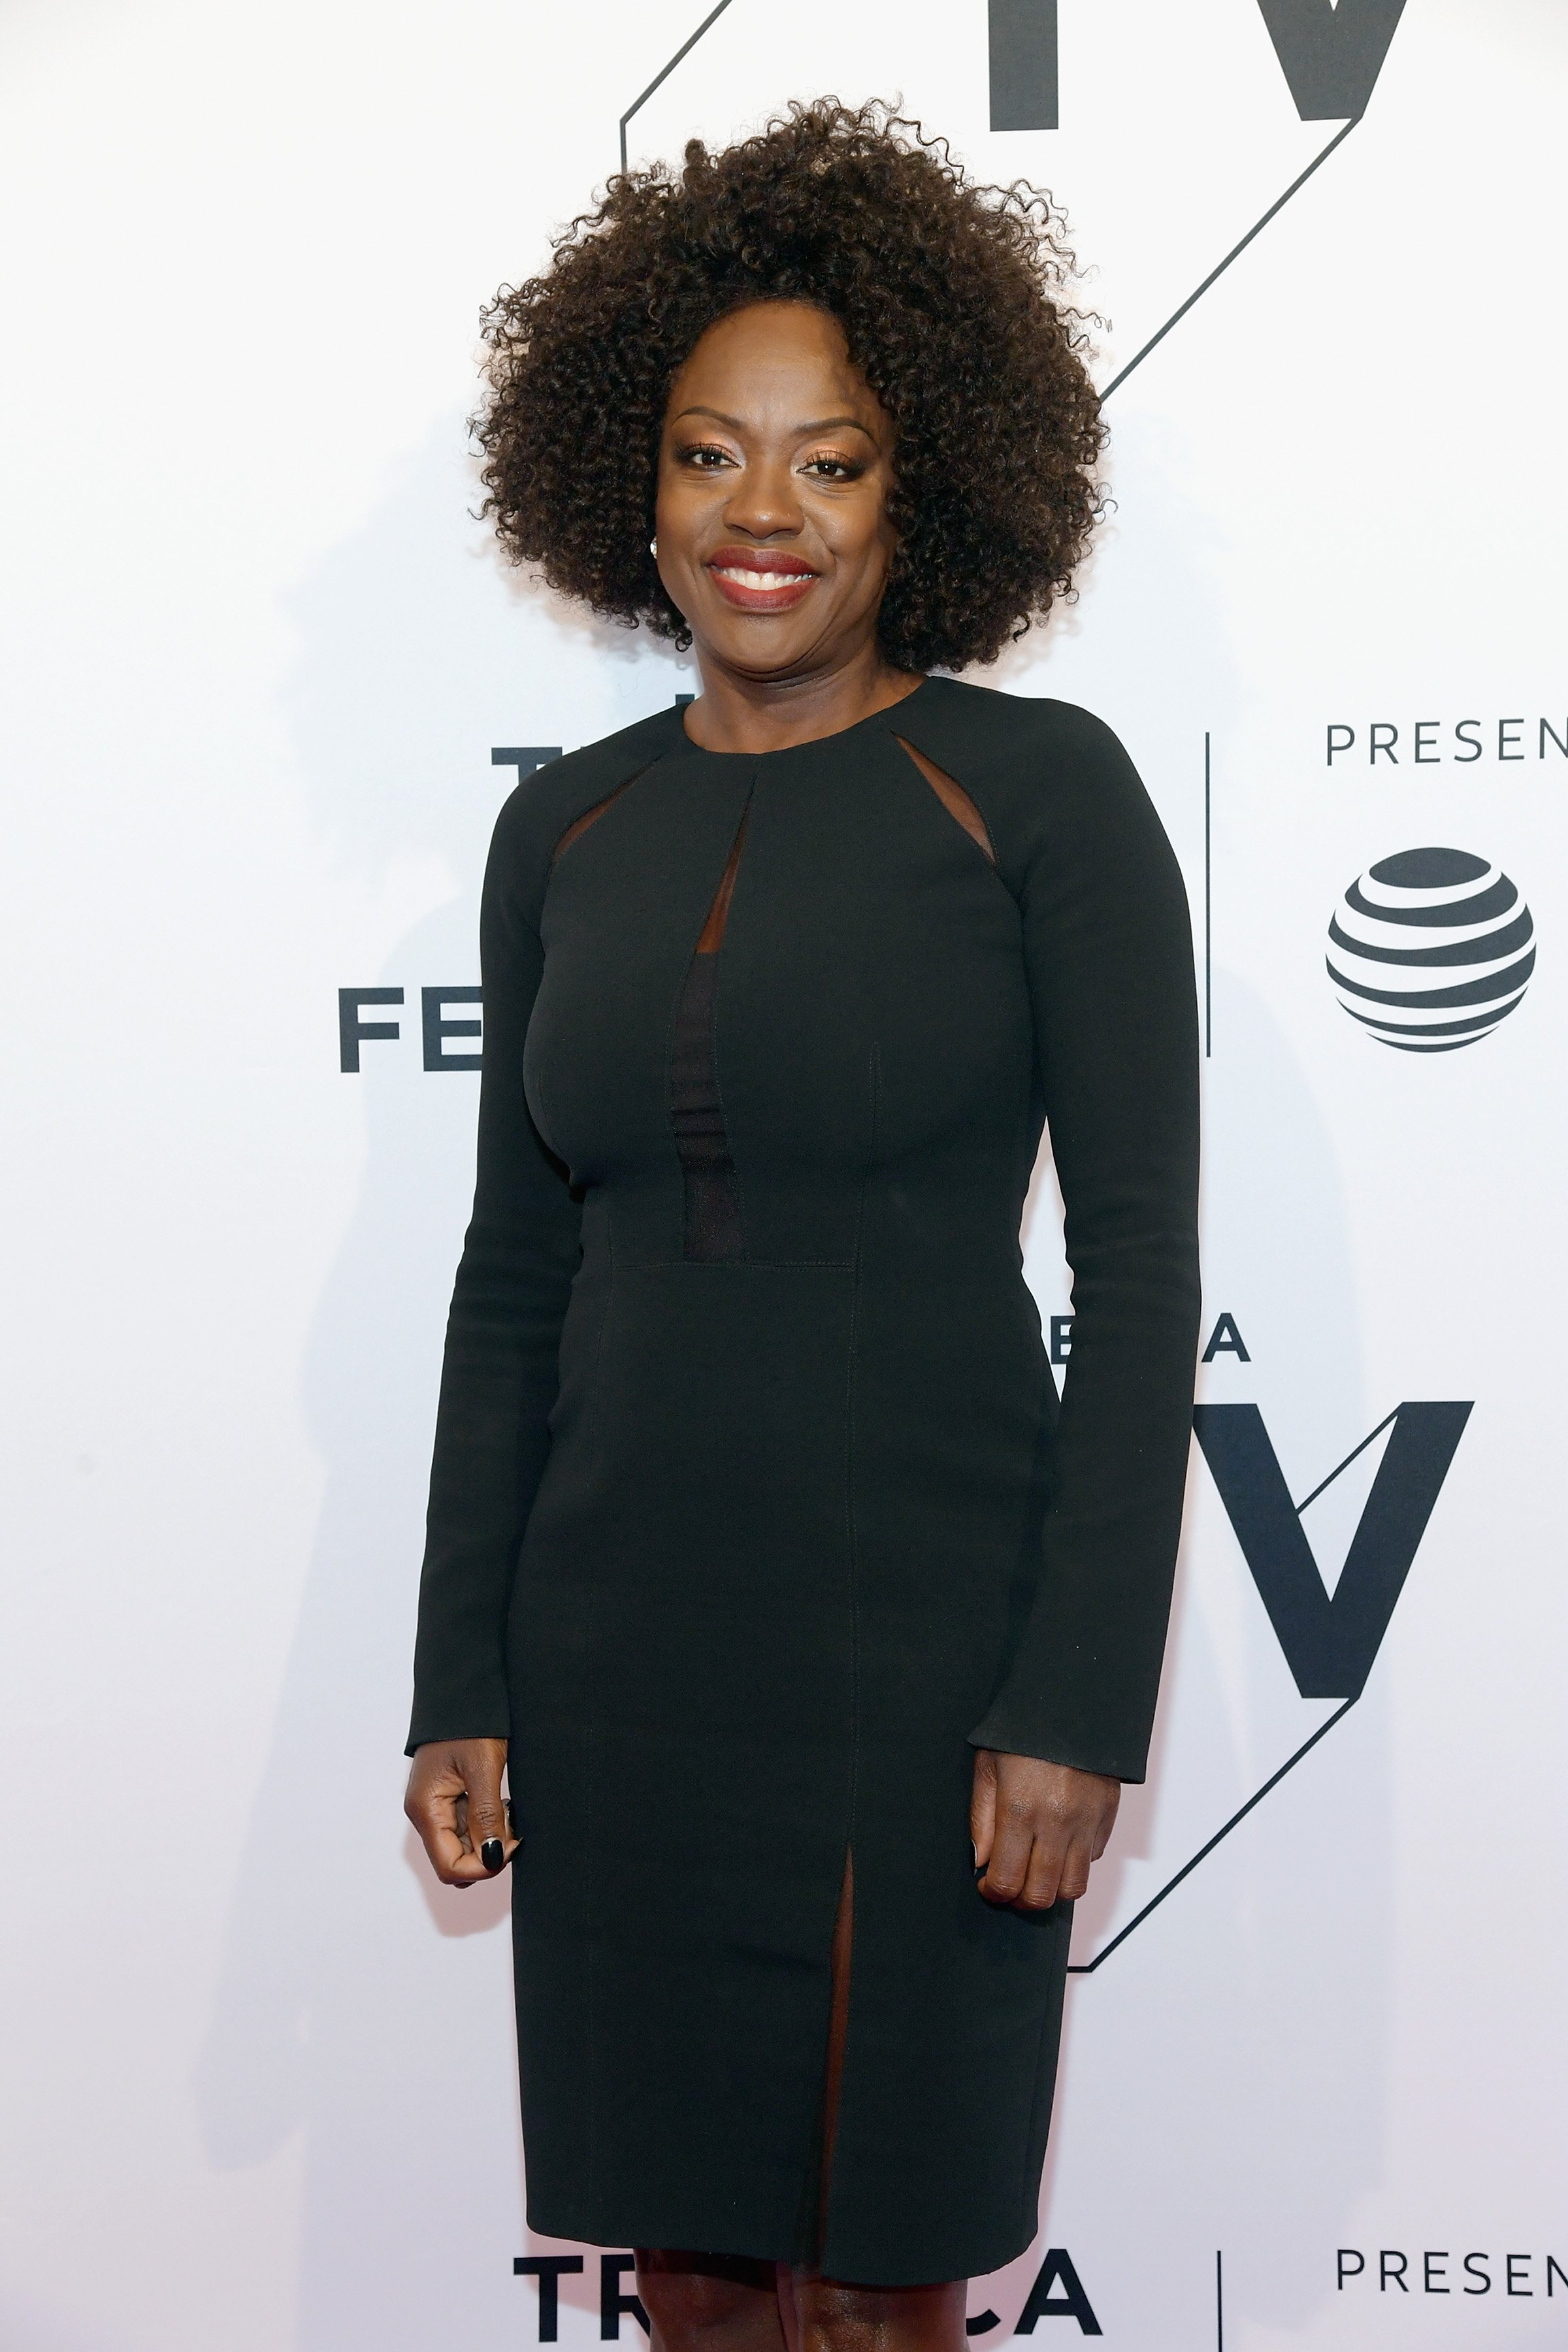 Viola Davis attends the screening of "The Last Defense" during the 2018 Tribeca Film Festival at SVA Theatre on April 27, 2018 in New York City. | Source: Getty Images